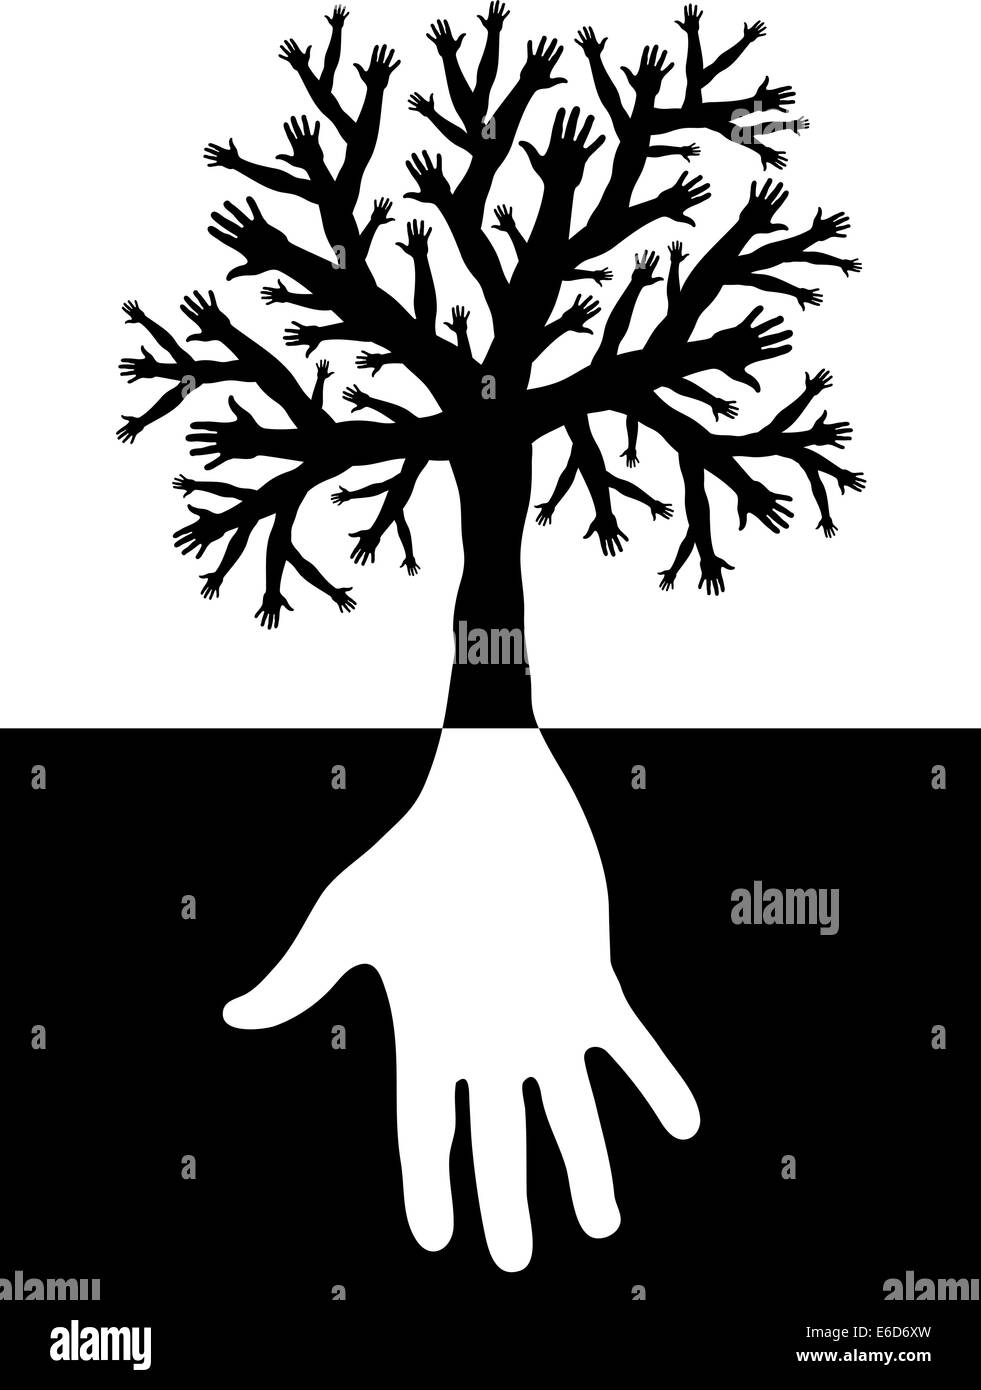 Editable vector design of a tree with branches and roots made of hands Stock Vector